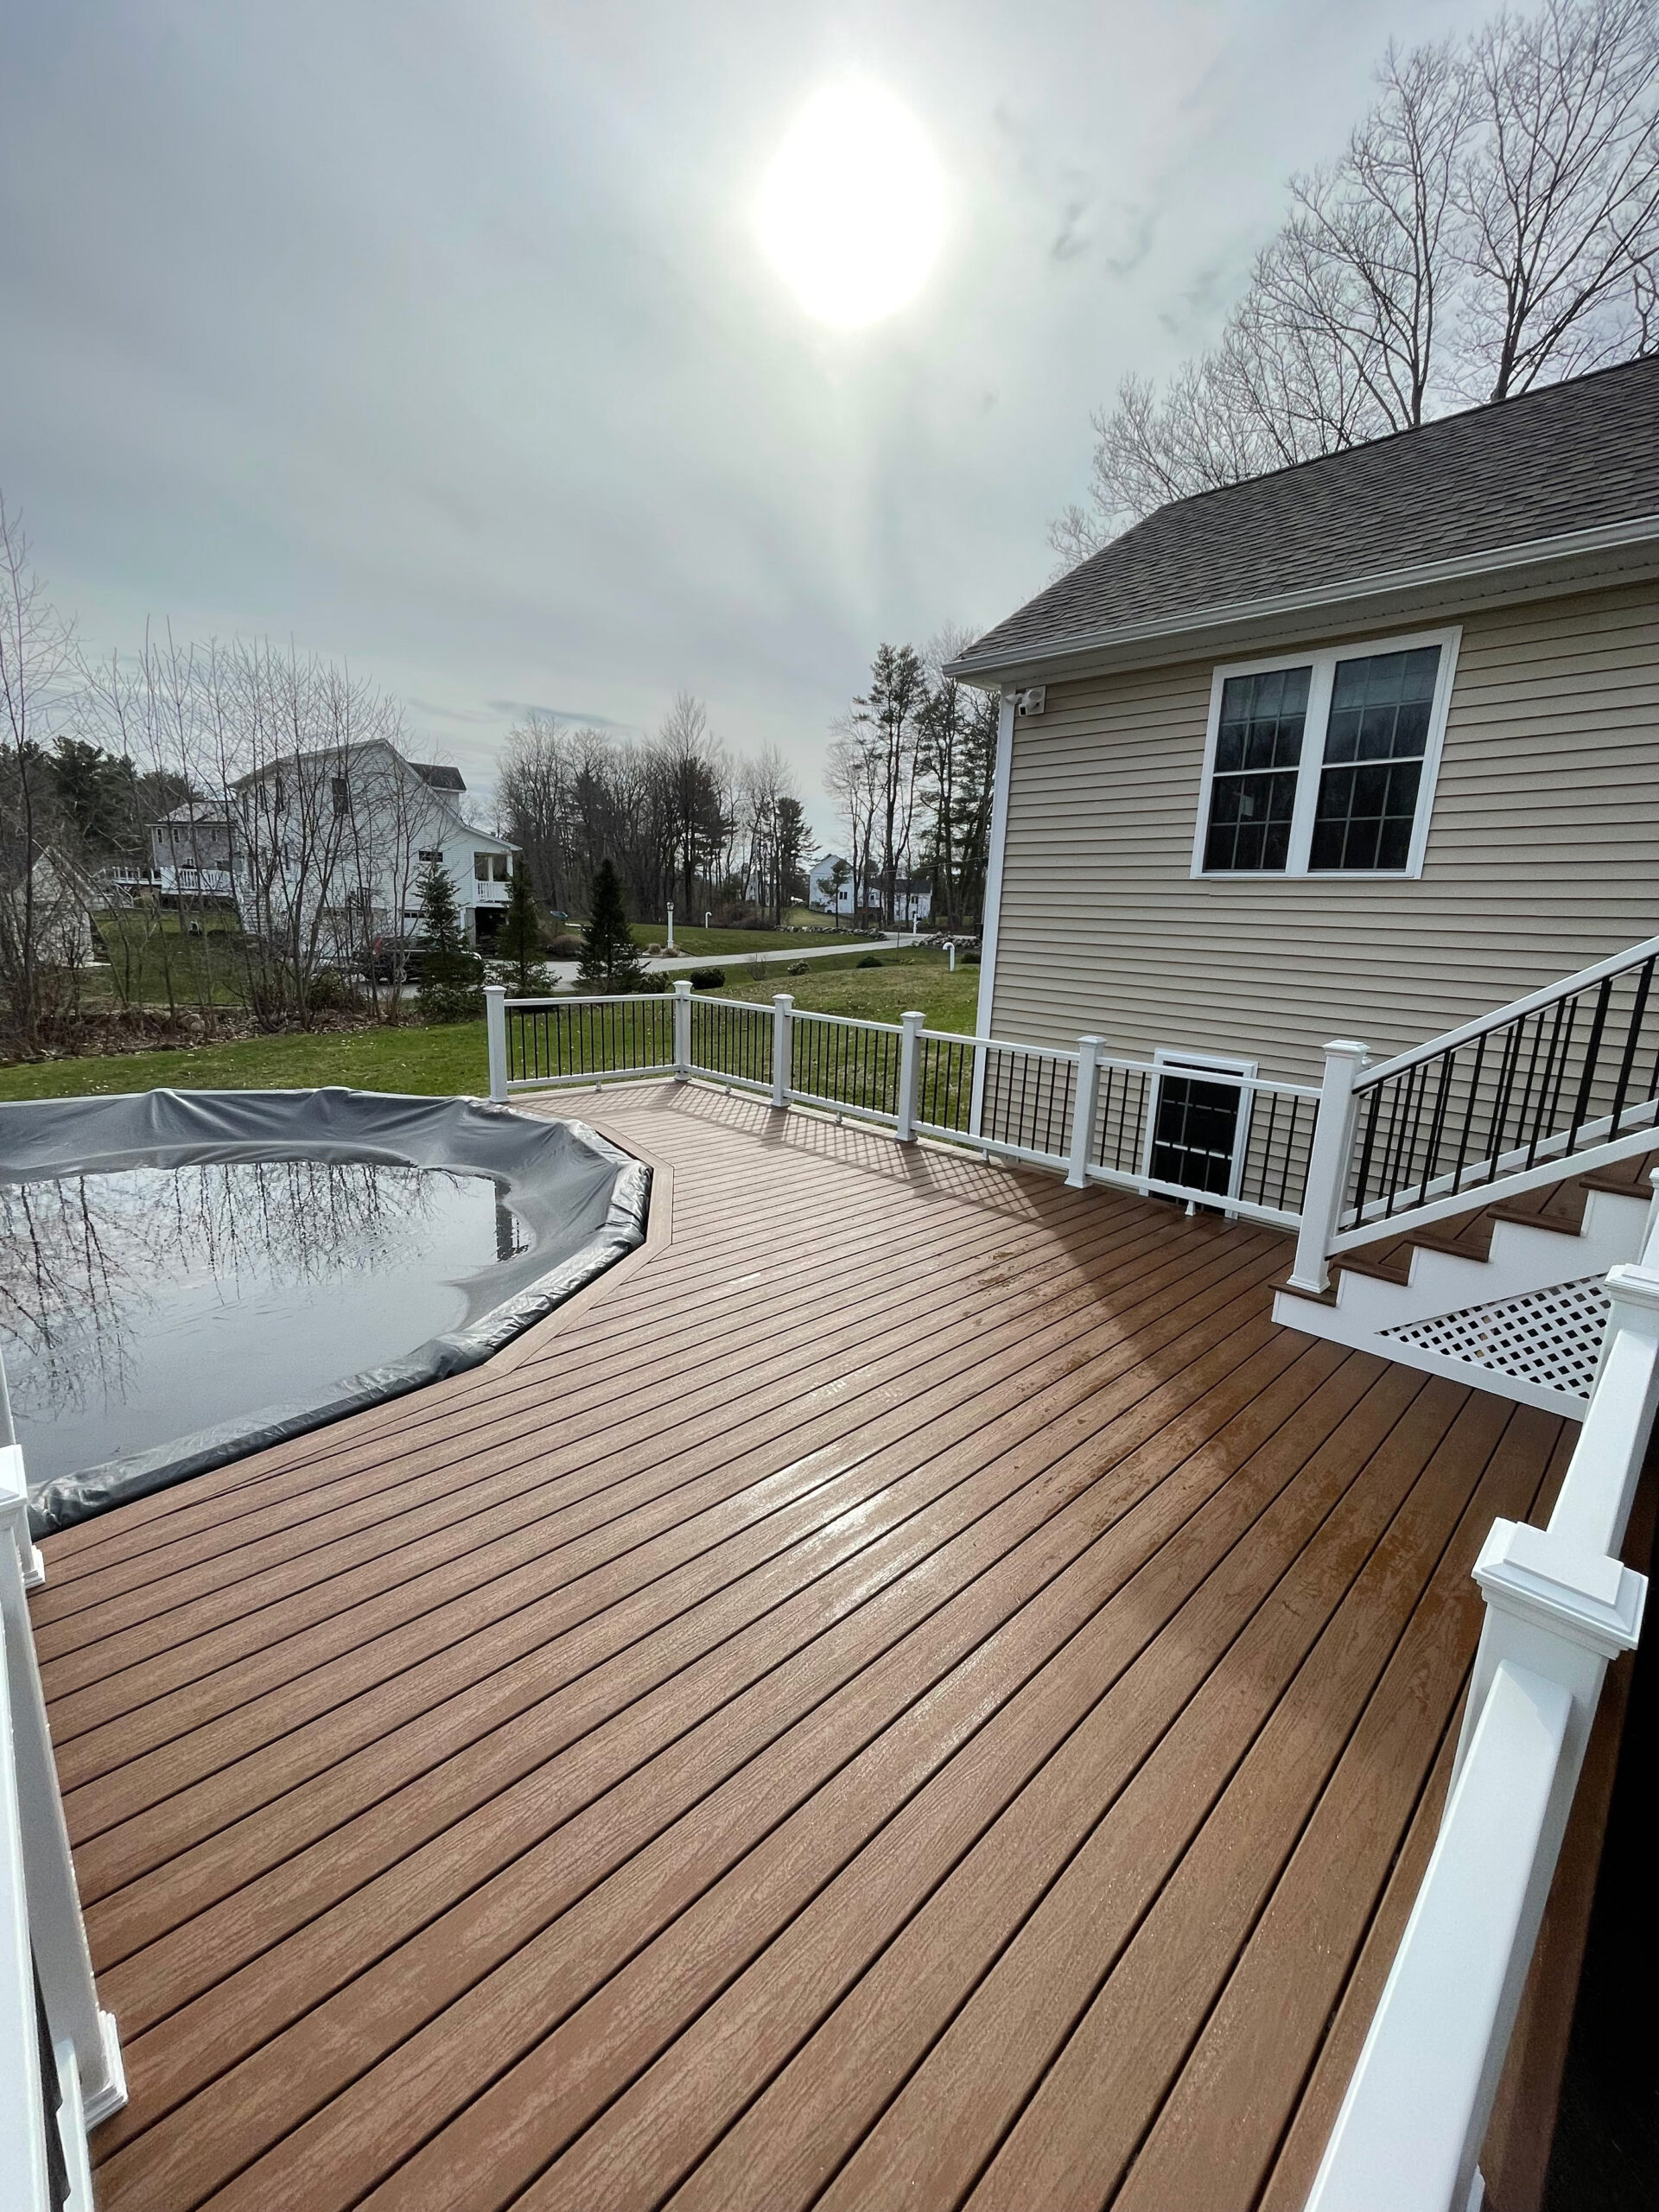 Trex company saddle composite decking around an above ground pool